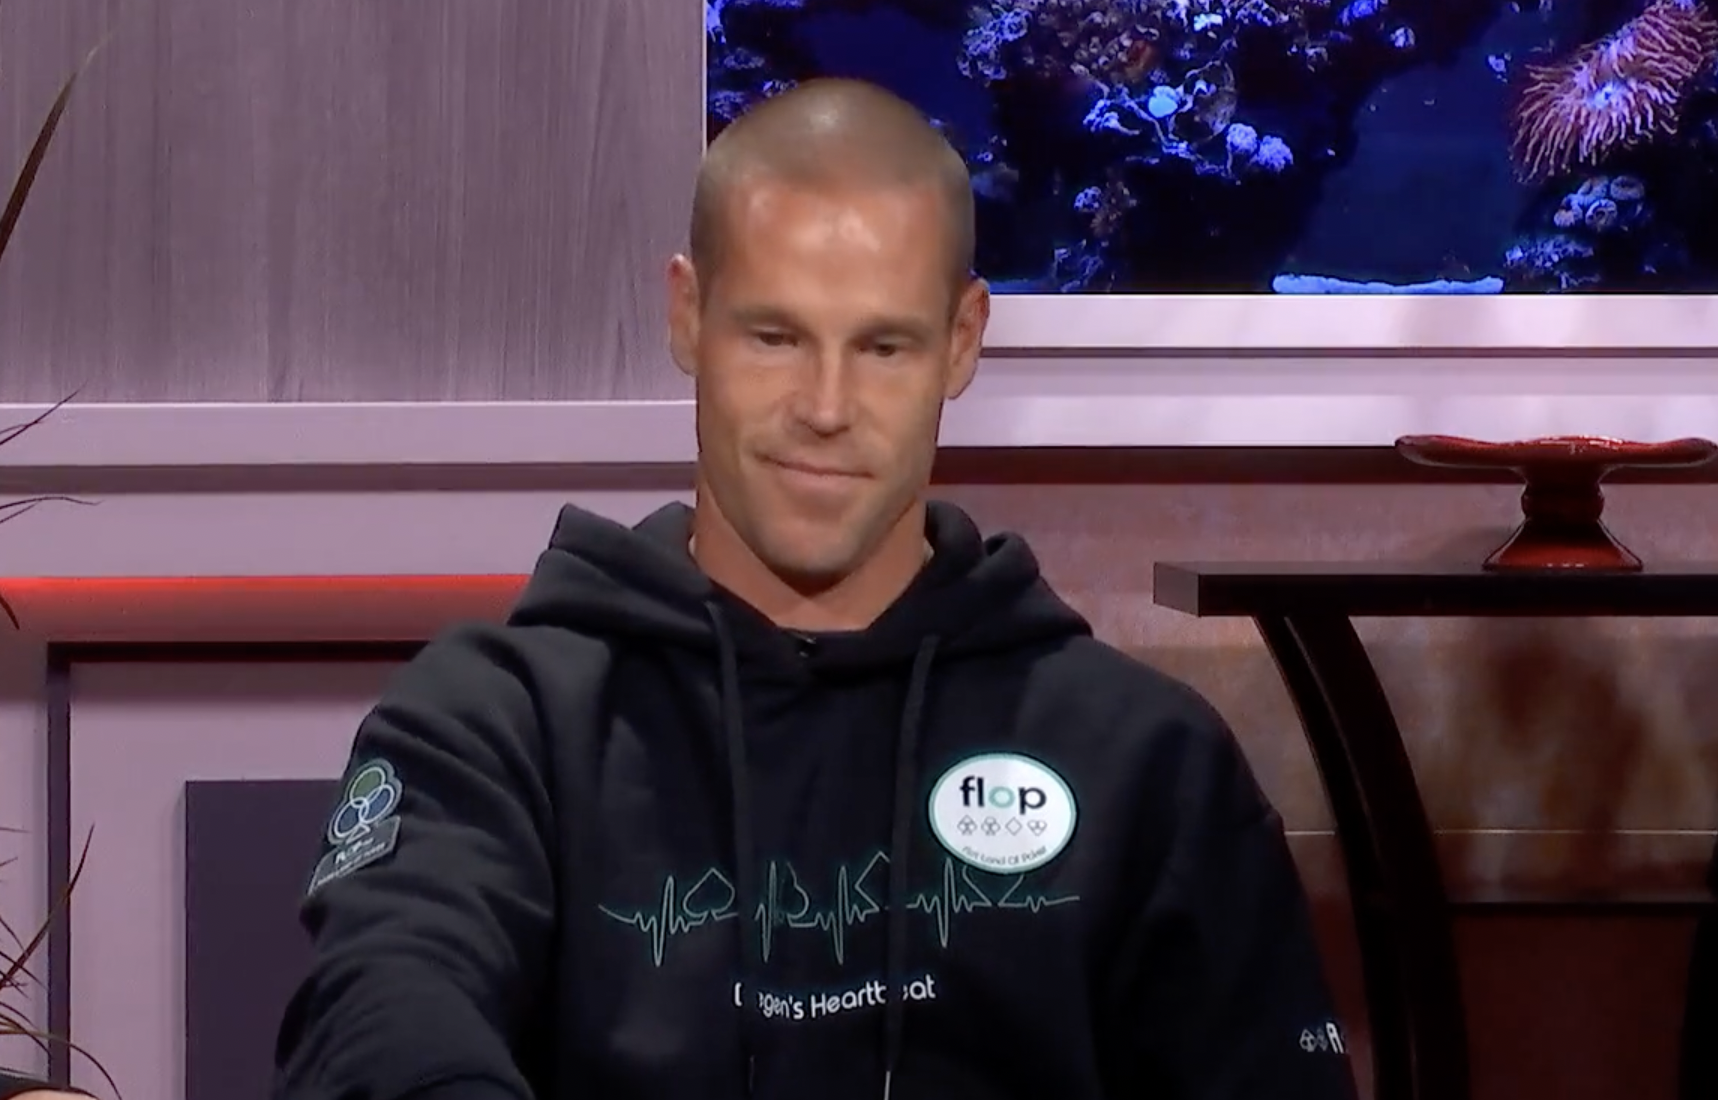 CardsChat Podcast: Patrik Antonius on his Fortunate and Lucky Ride